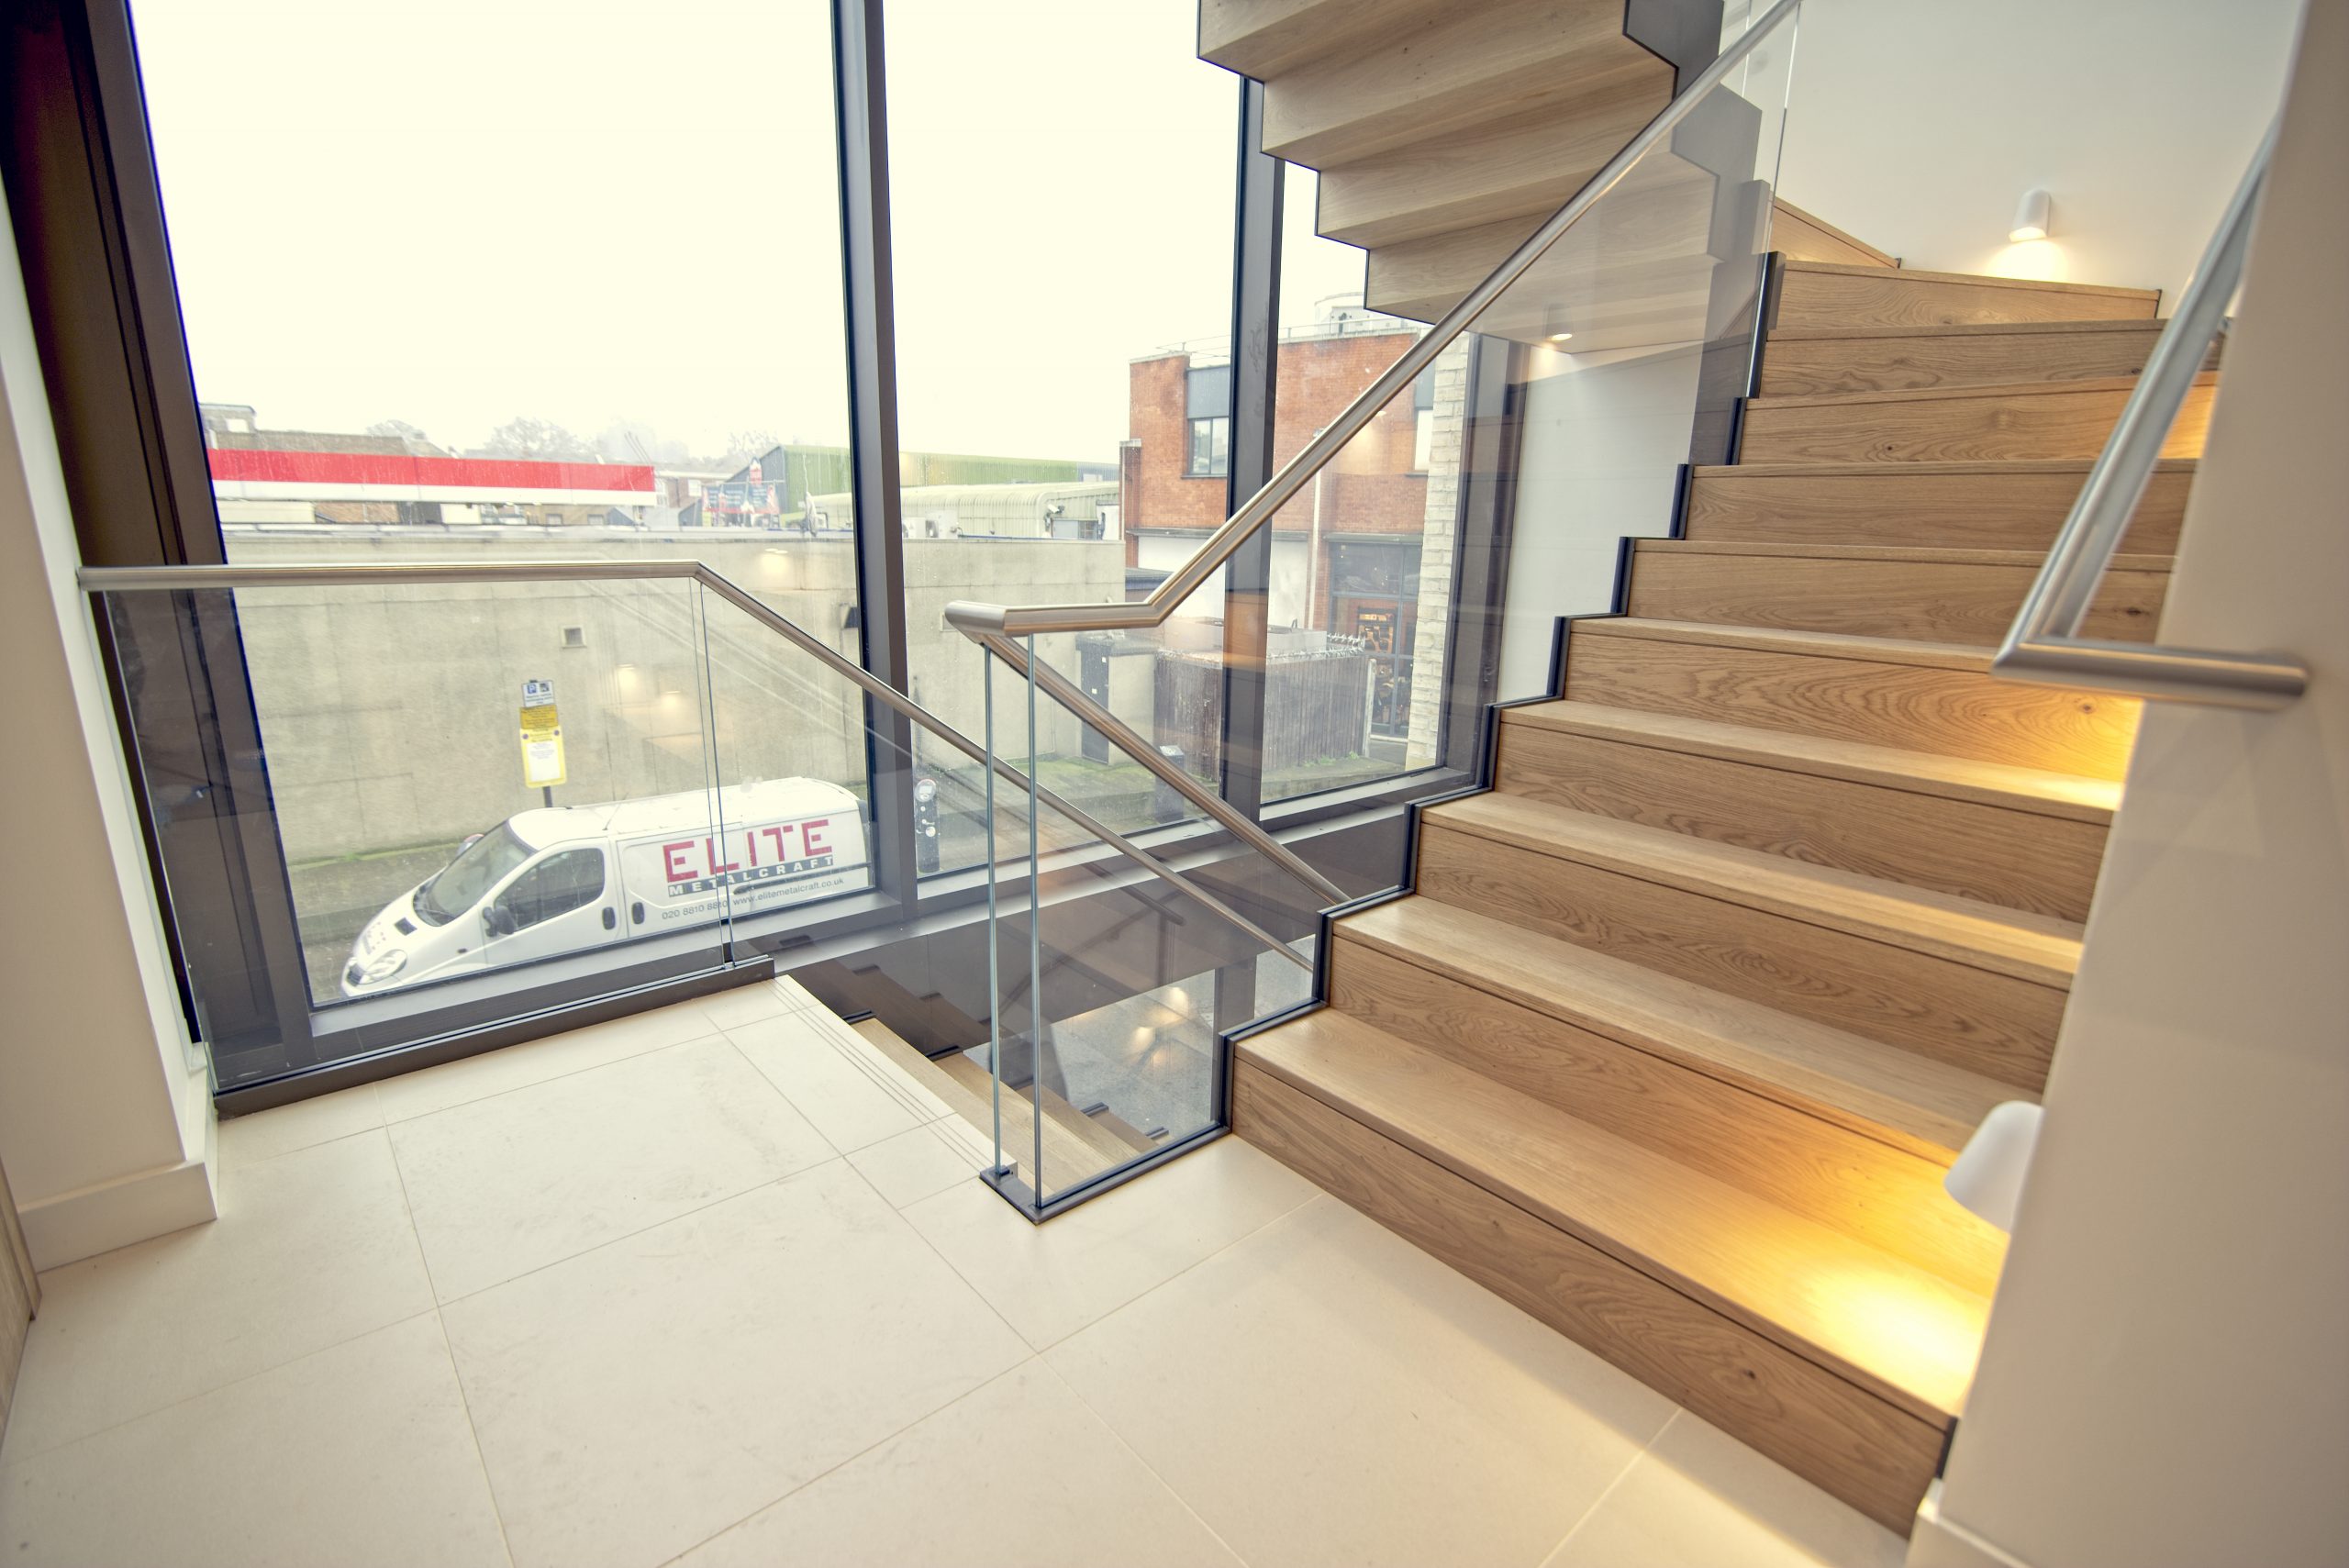 Glass staircase design with Elite Metalcraft van on road outside